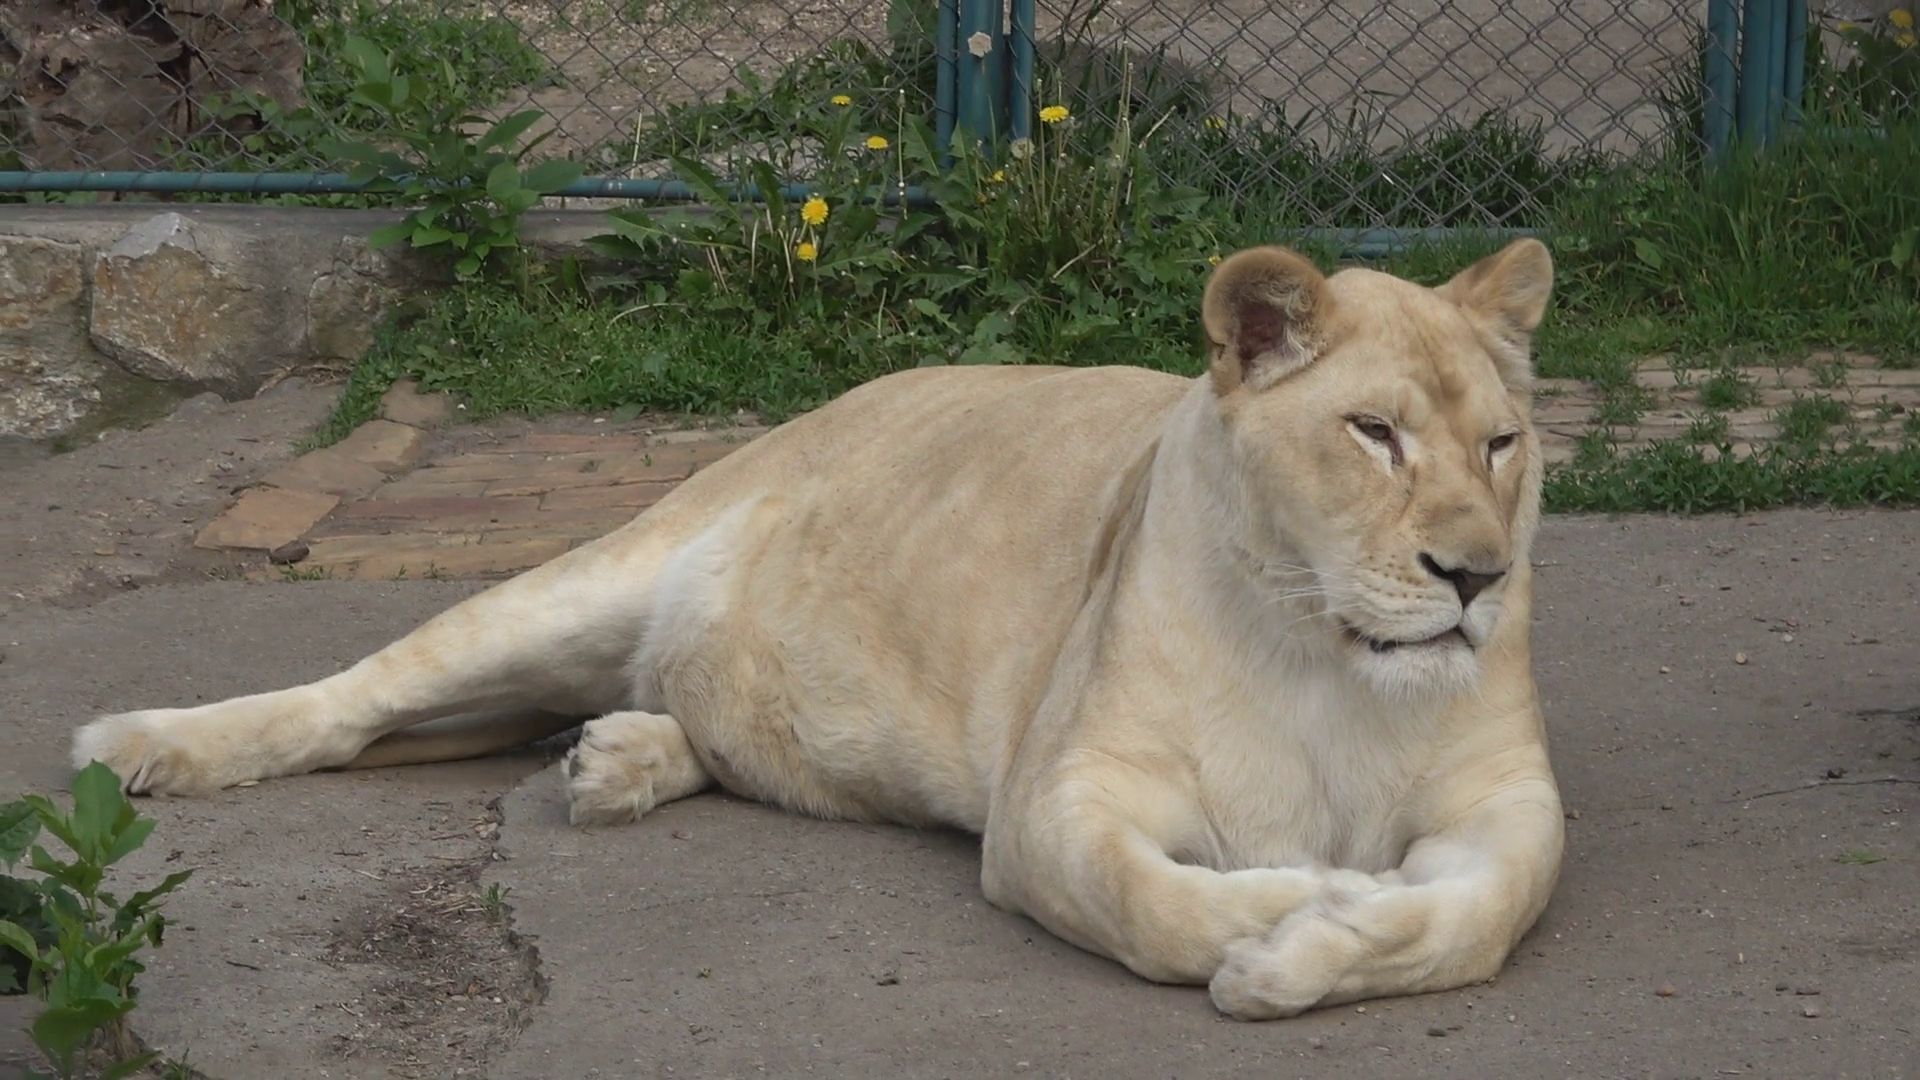 White Lioness In The Zoo Slow Motion Stock Video Footage - VideoBlocks